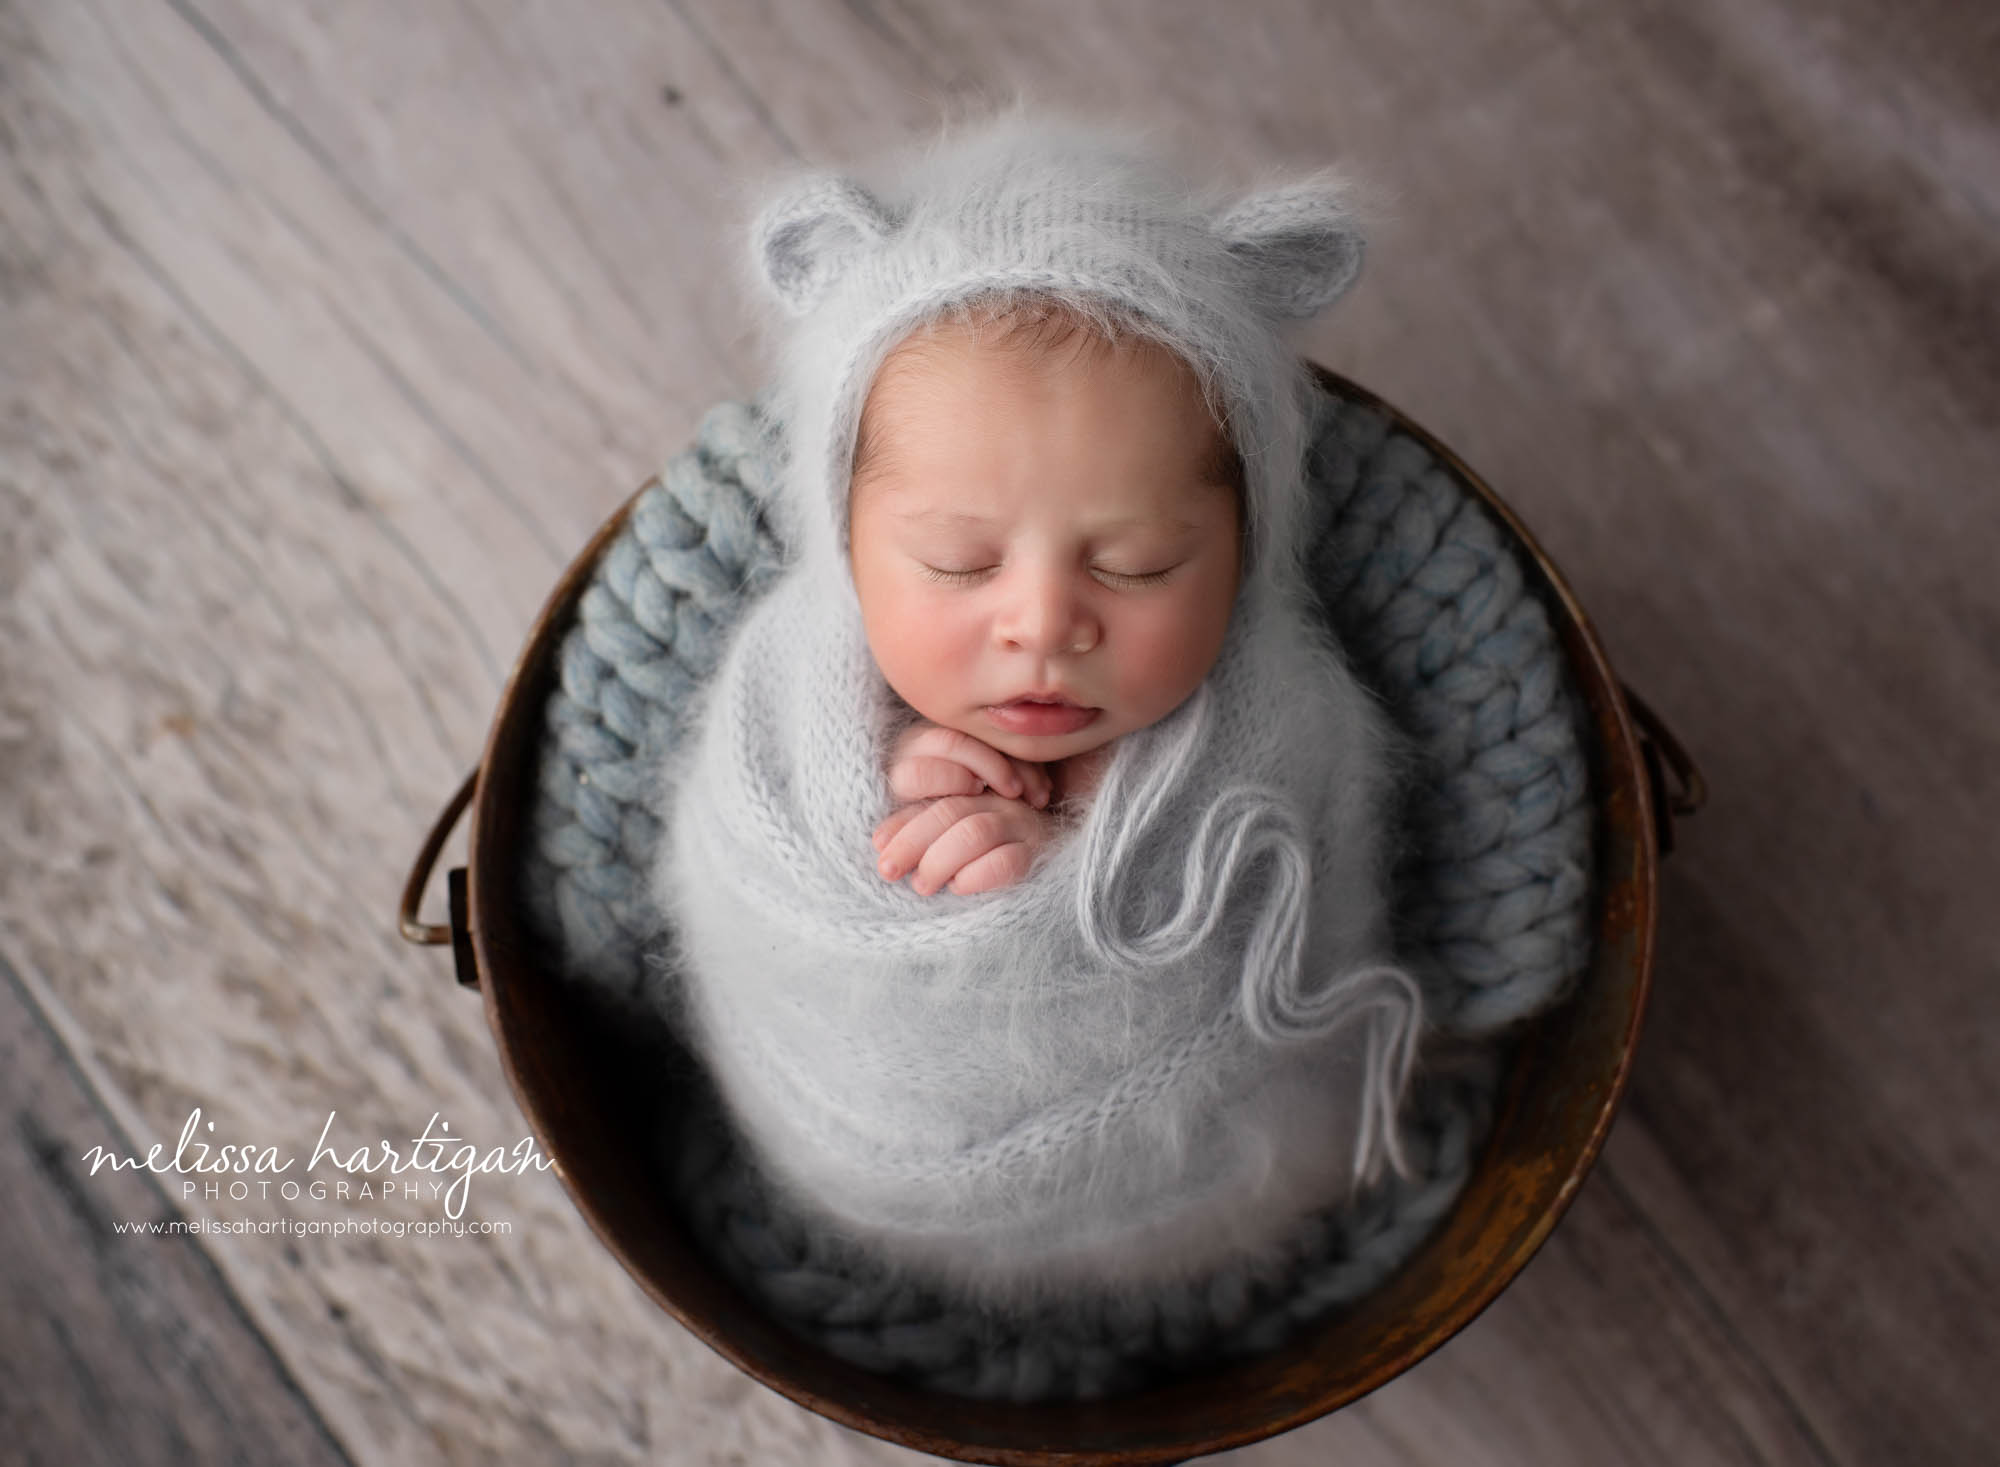 Newborn baby boy wrapped in knitted gray wrap with matching bear bonnet